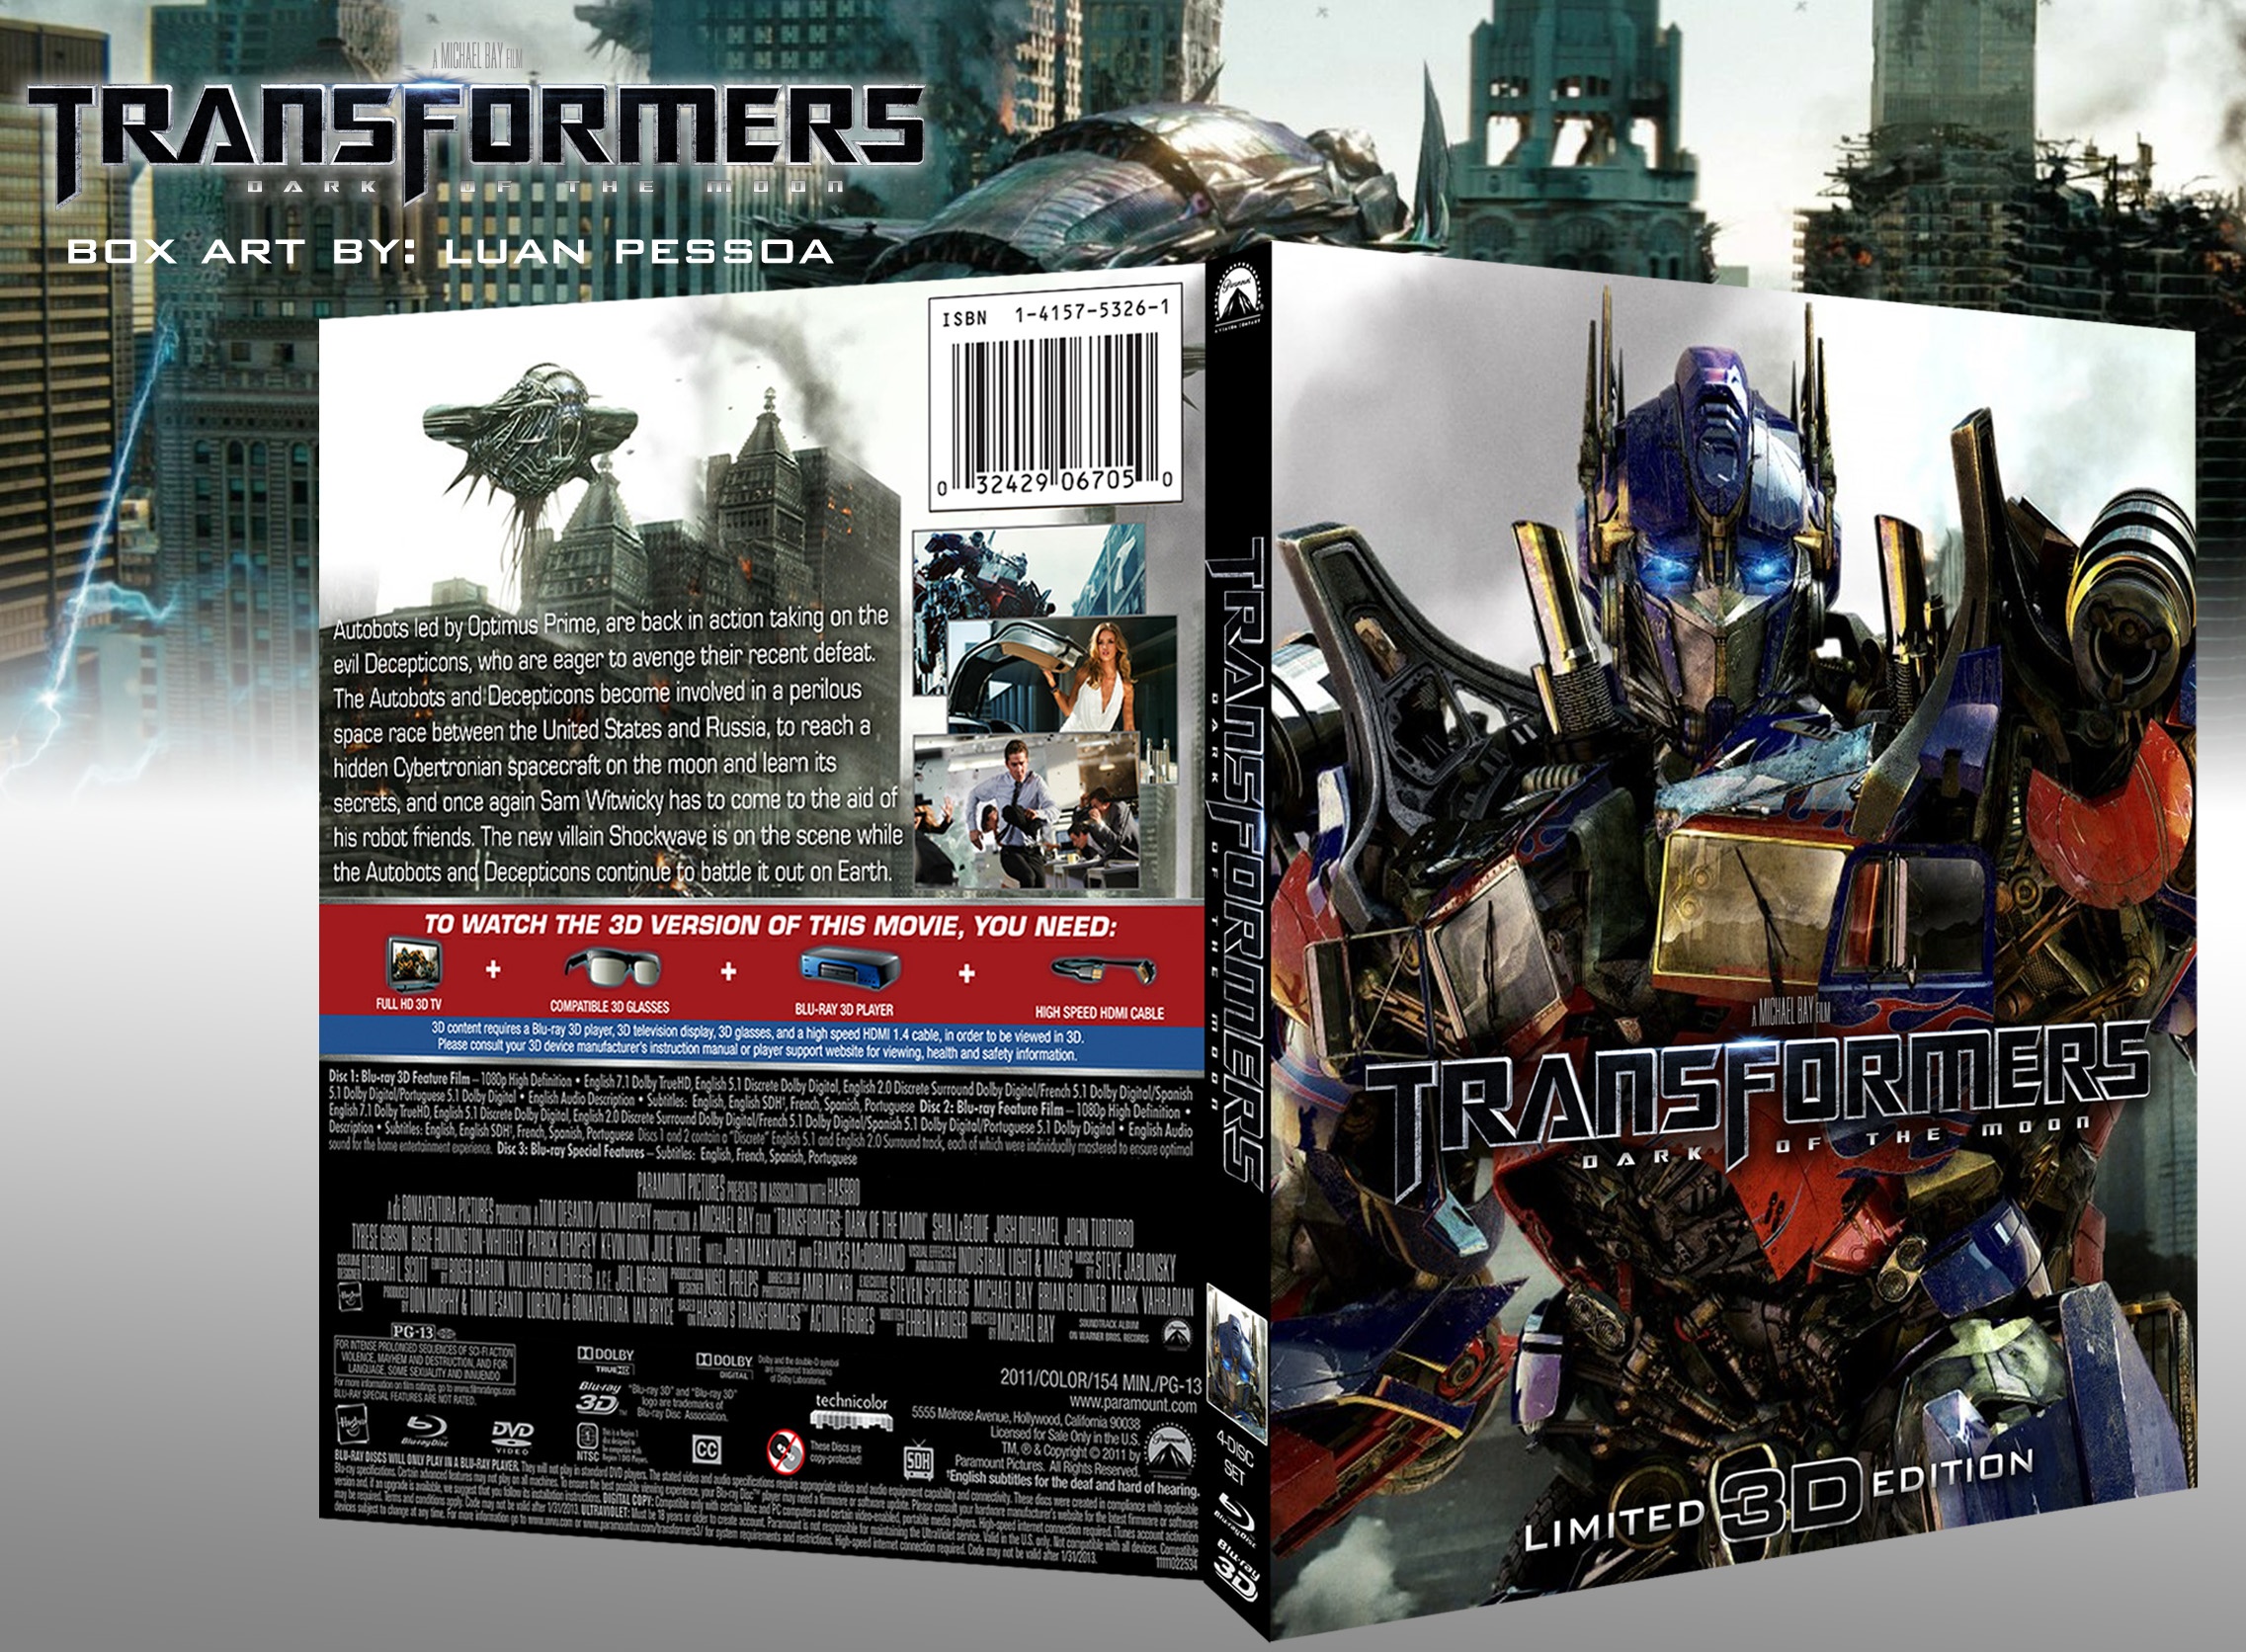 Transformers: Dark of the Moon box cover